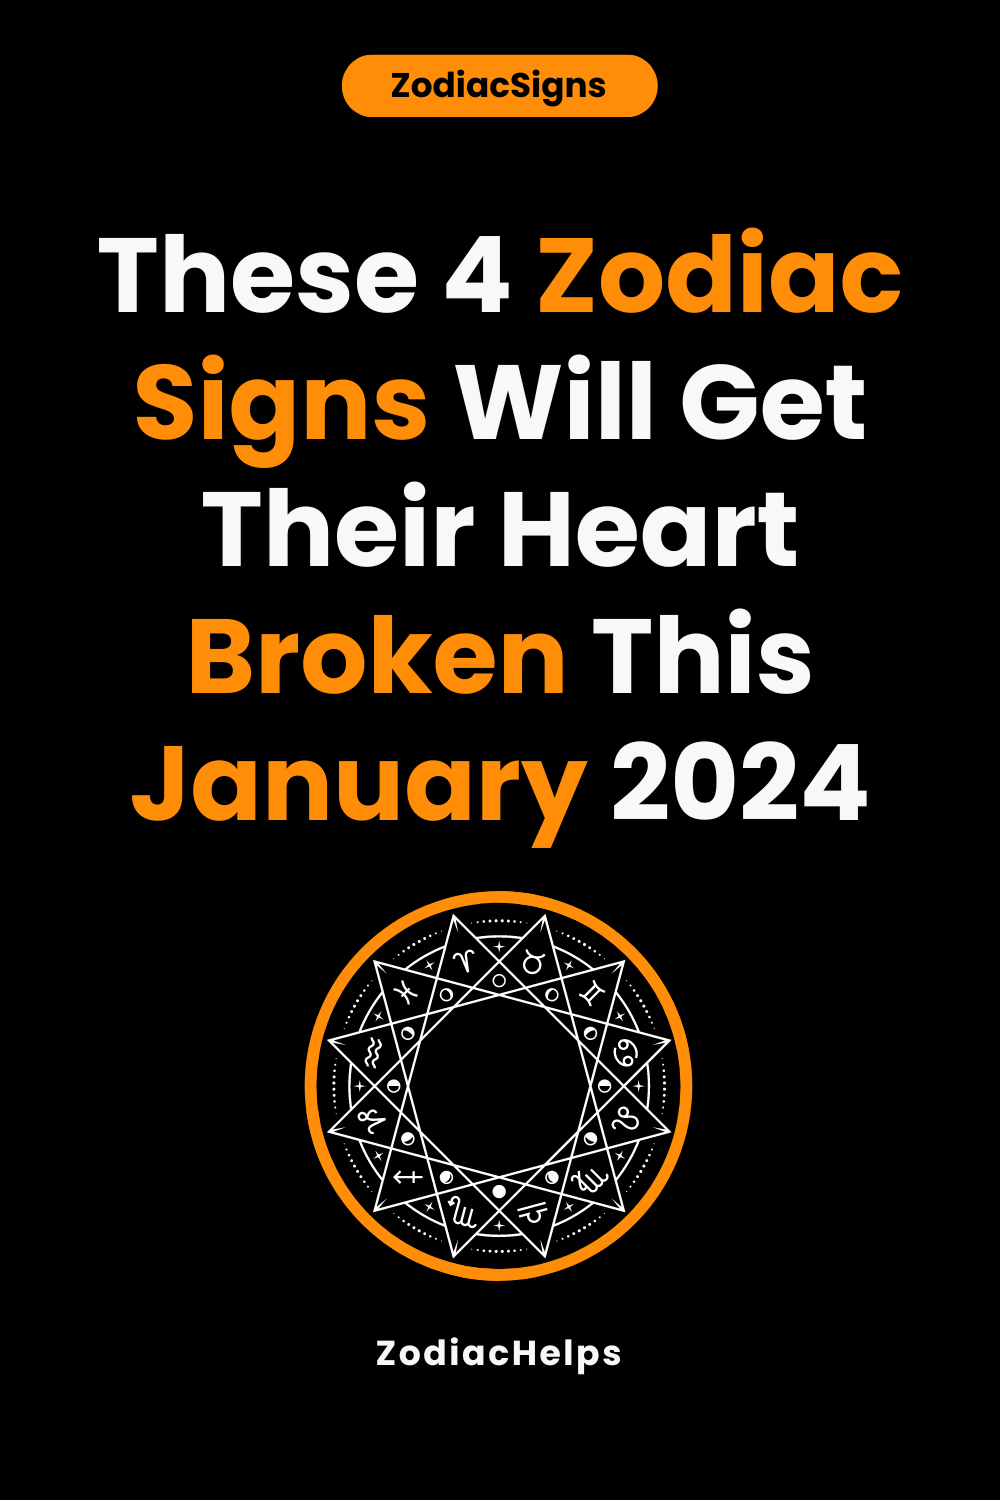 These 4 Zodiac Signs Will Get Their Heart Broken This January 2024